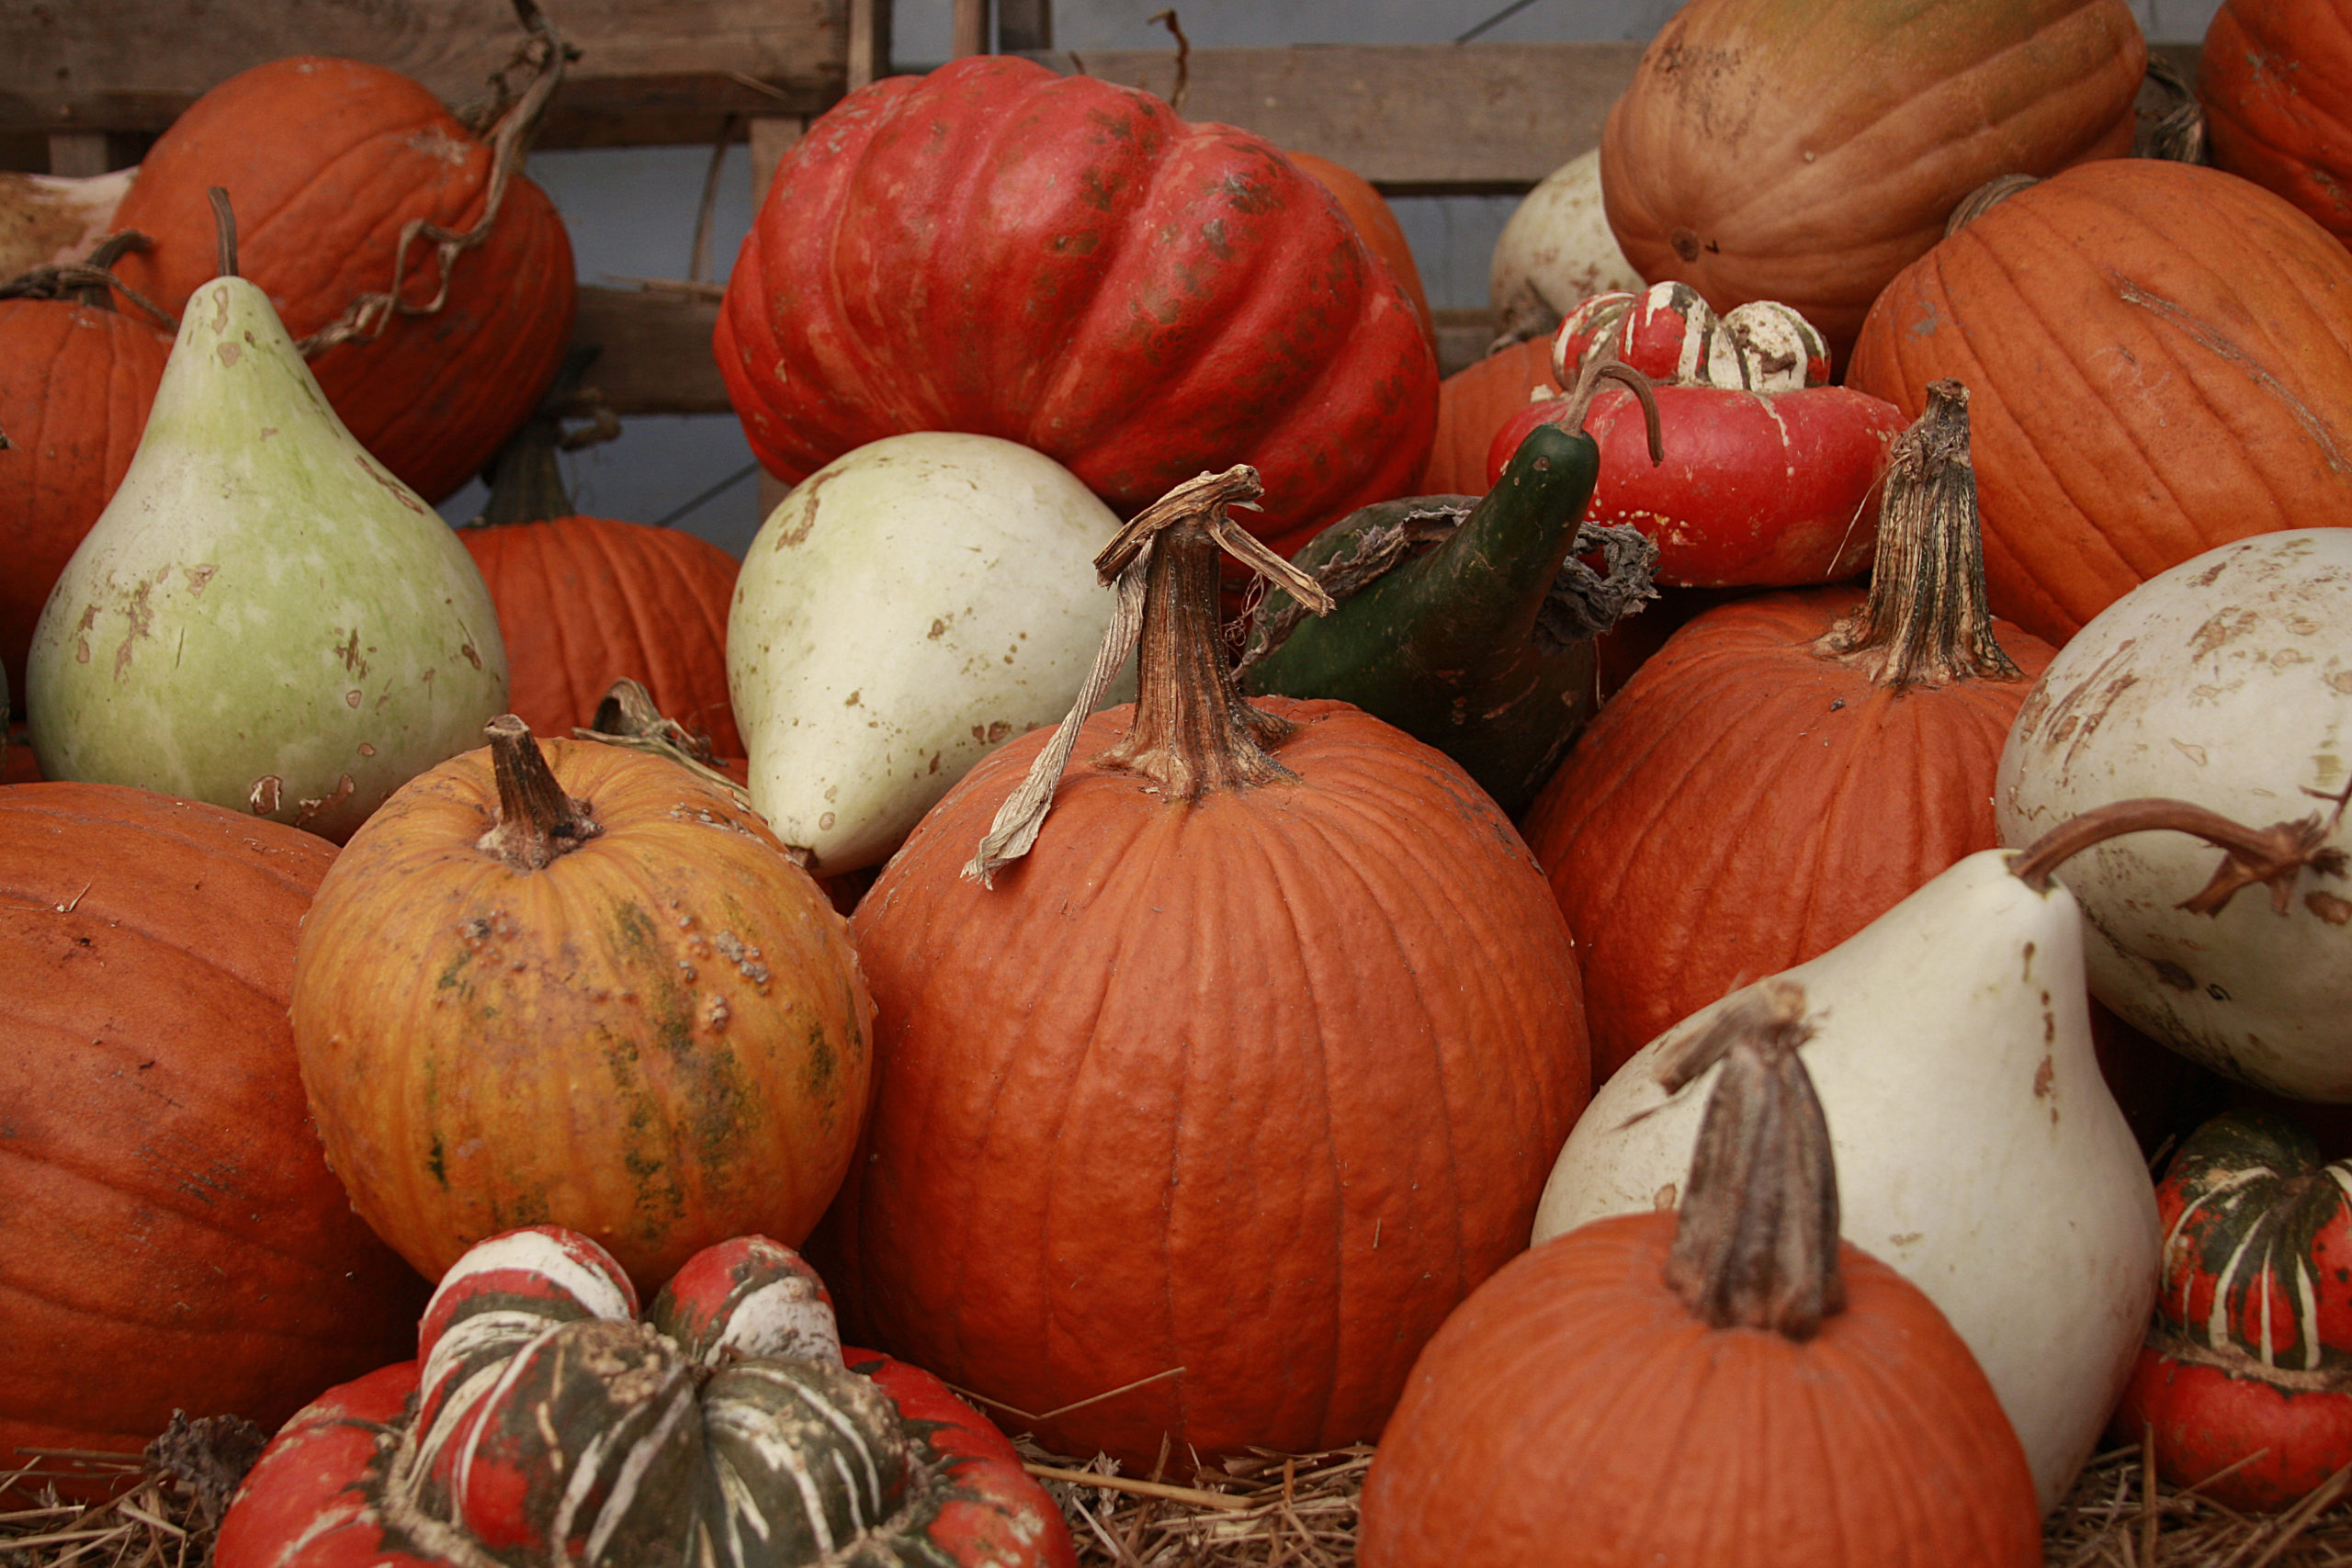 Give jack-o’-lanterns an afterlife with composting